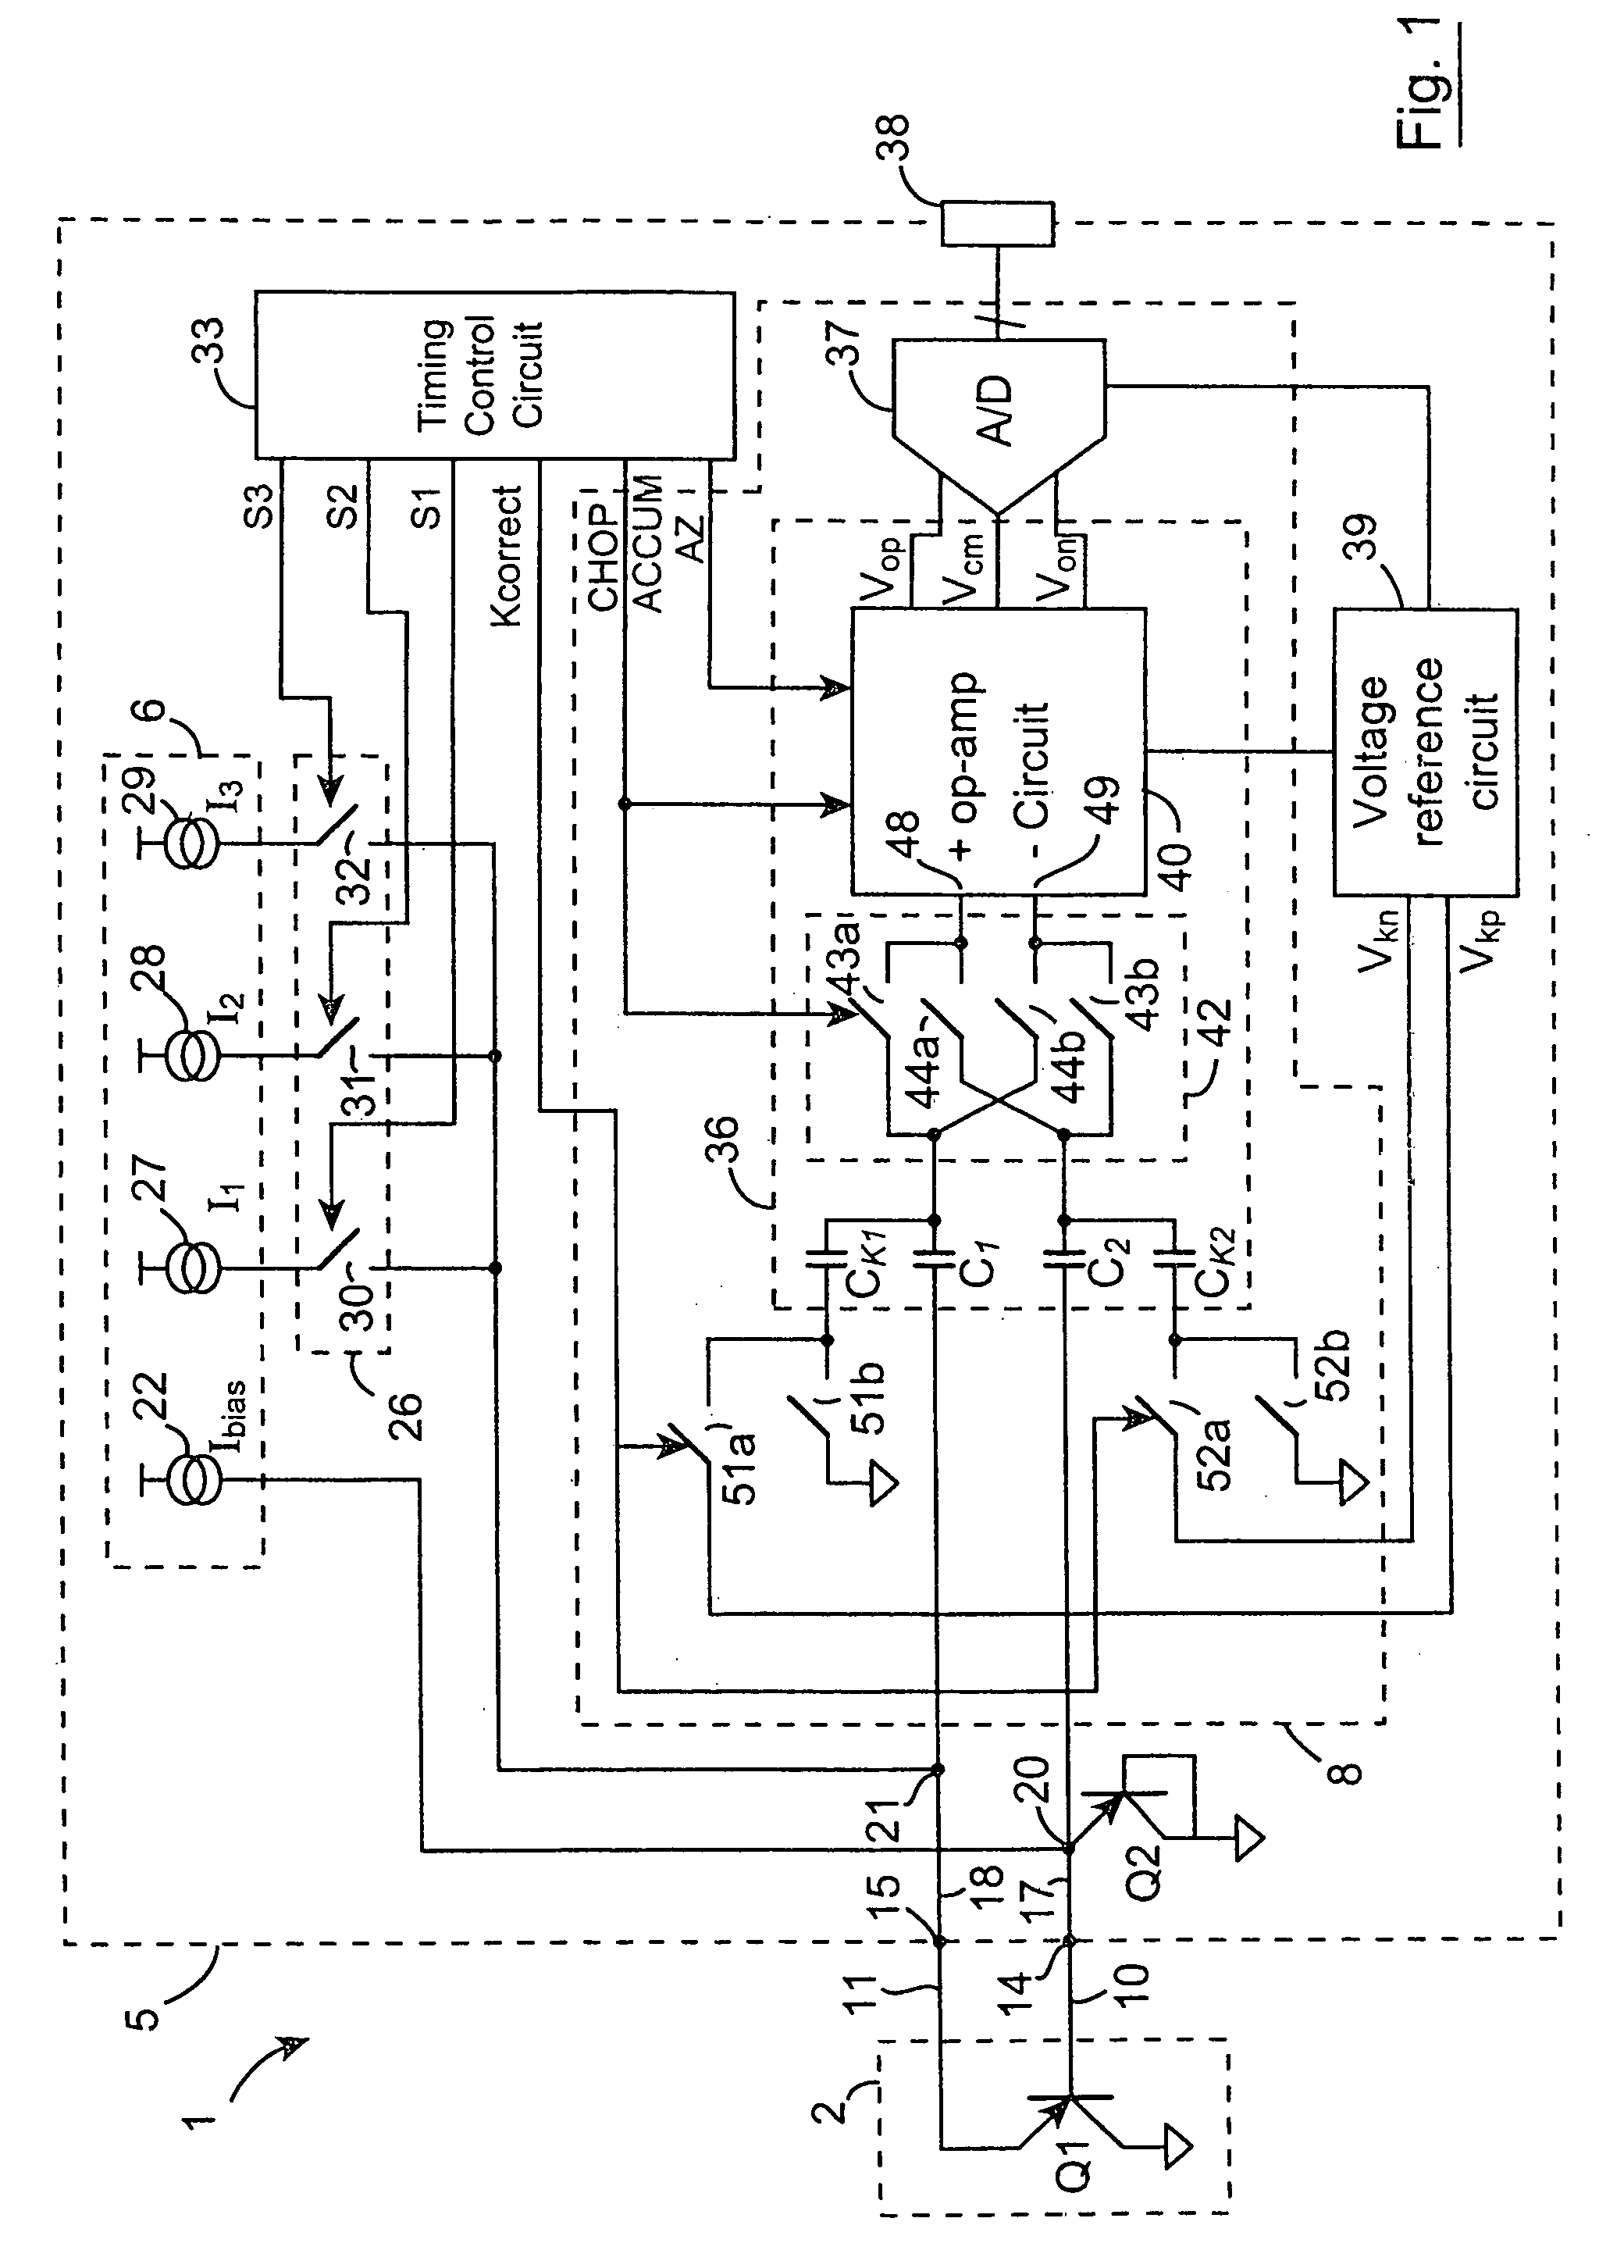 Method and a measuring circuit for determining temperature from a PN junction temperature sensor, and a temperature sensing circuit comprising the measuring circuit and a PN junction